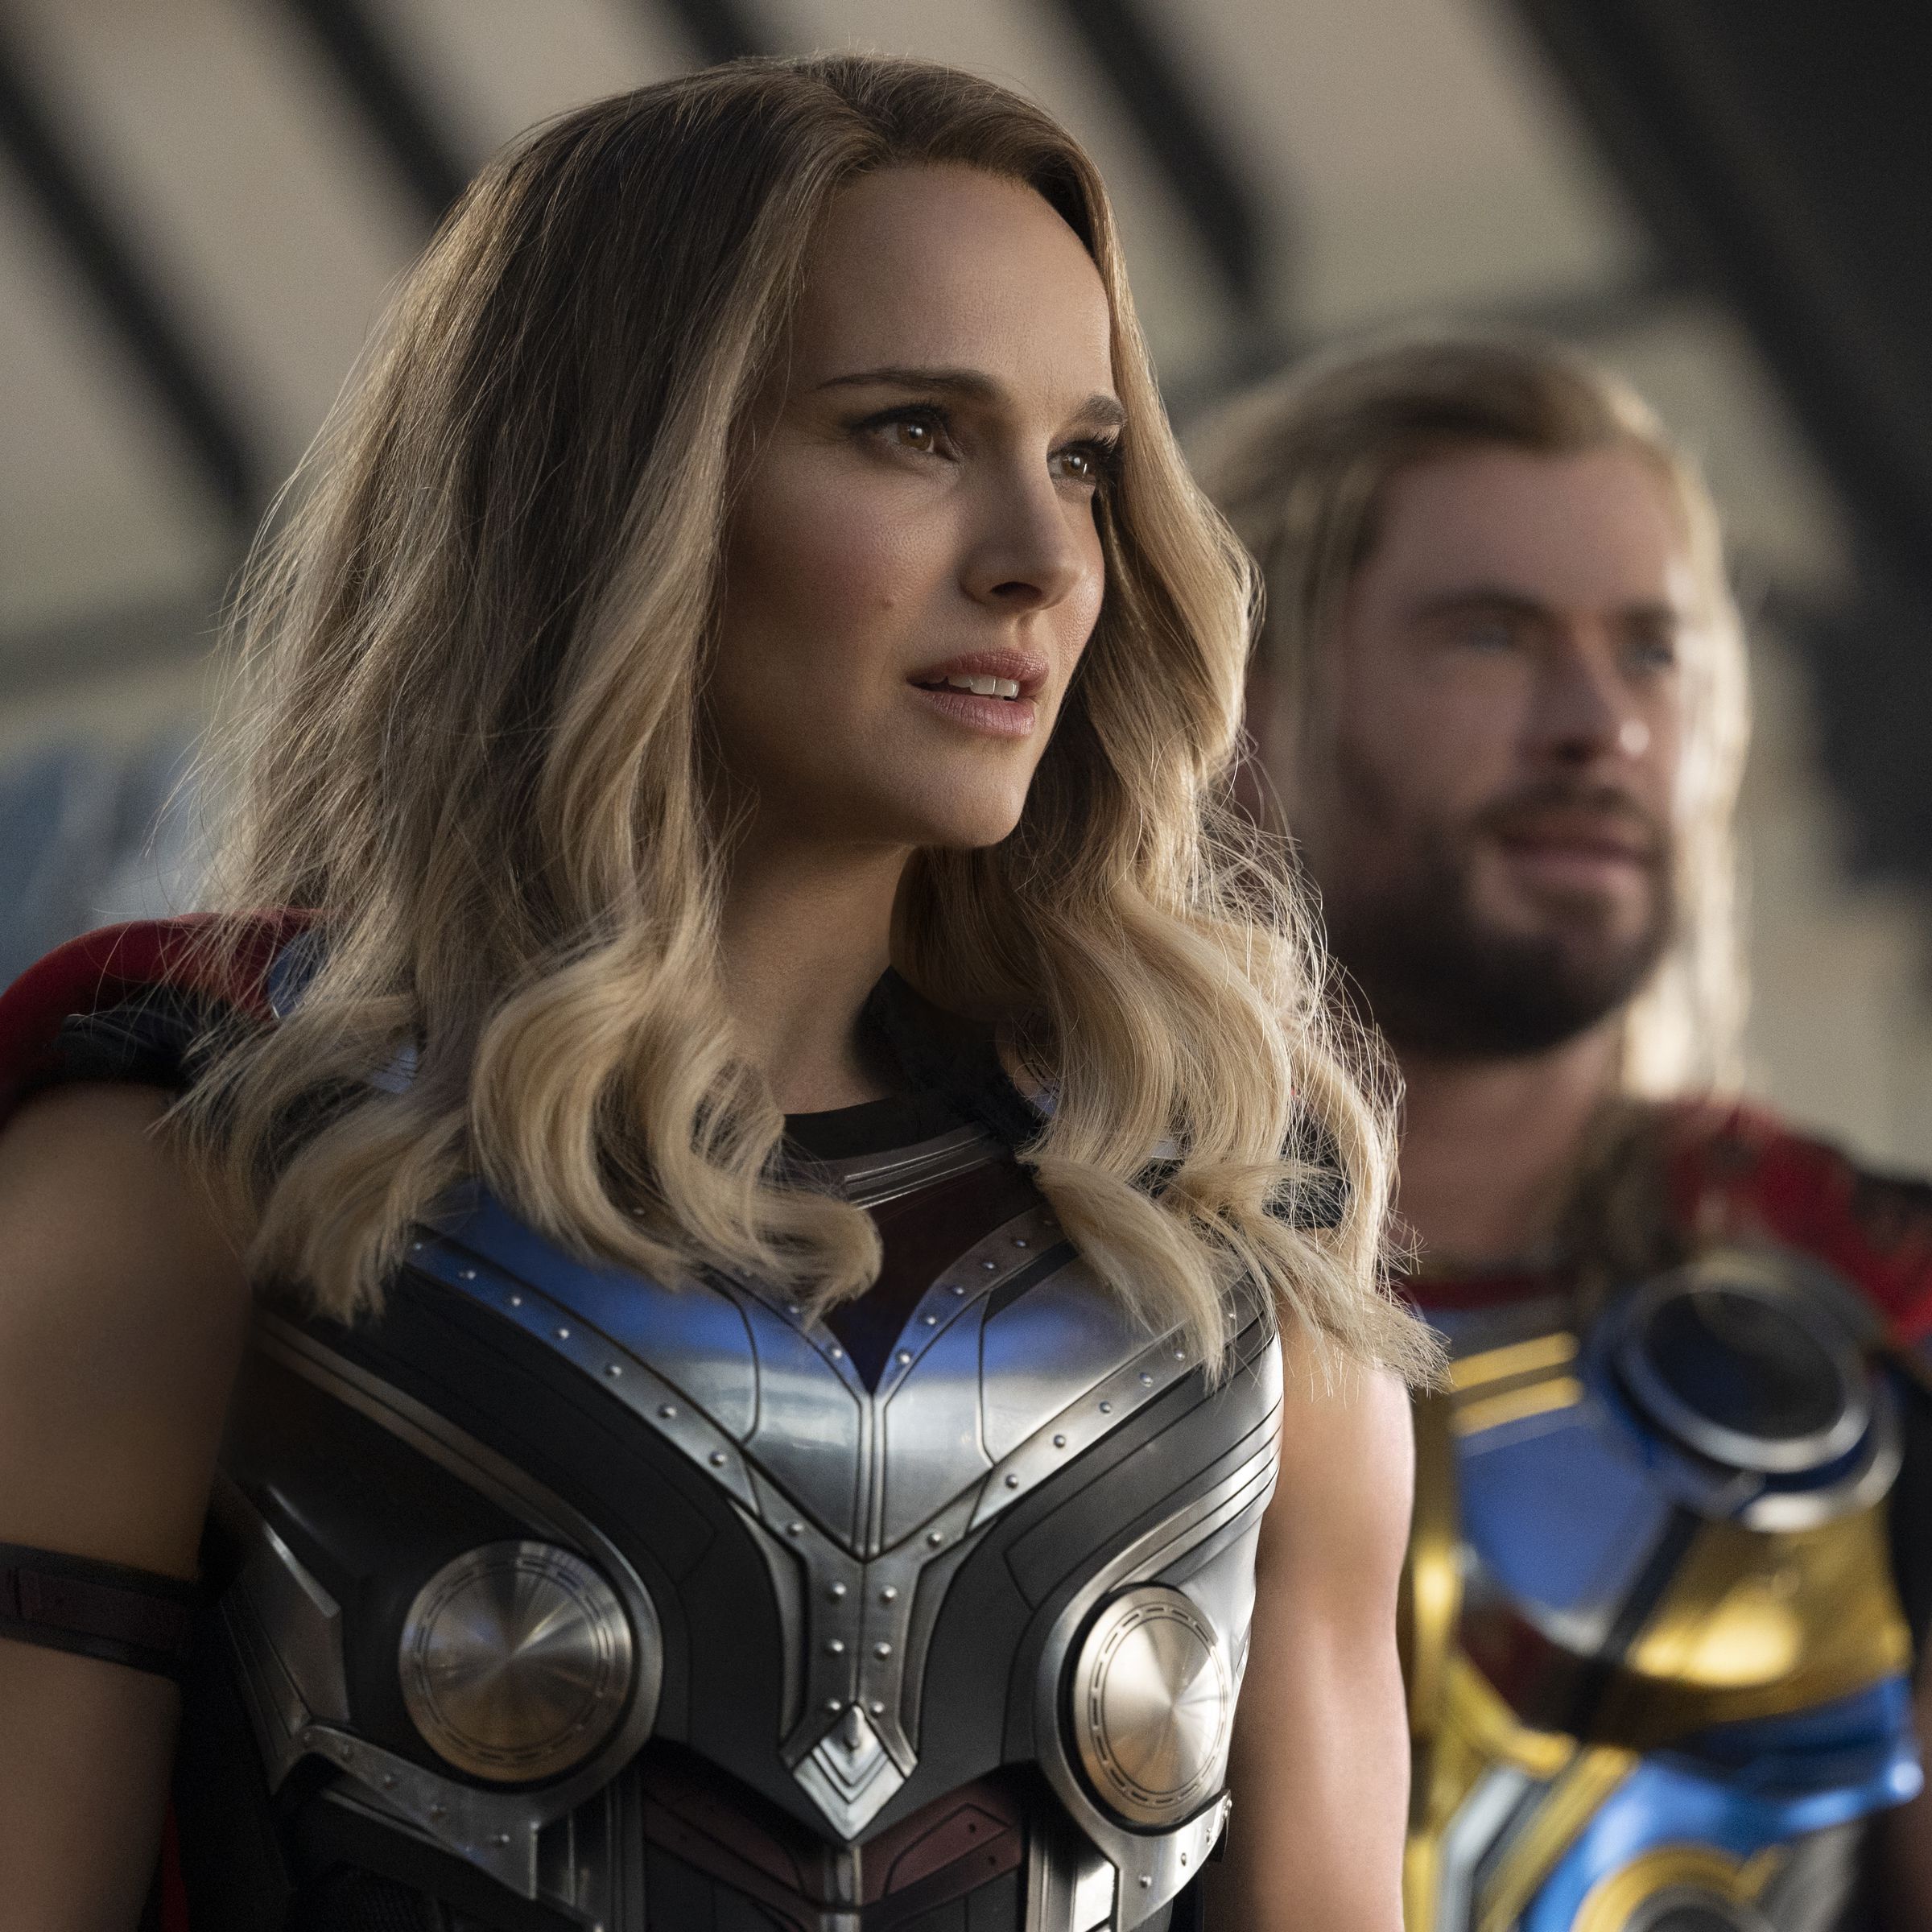 Natalie Portman as Jane Foster, the Mighty Thor, and Chris Hemsworth as Thor Odinson.